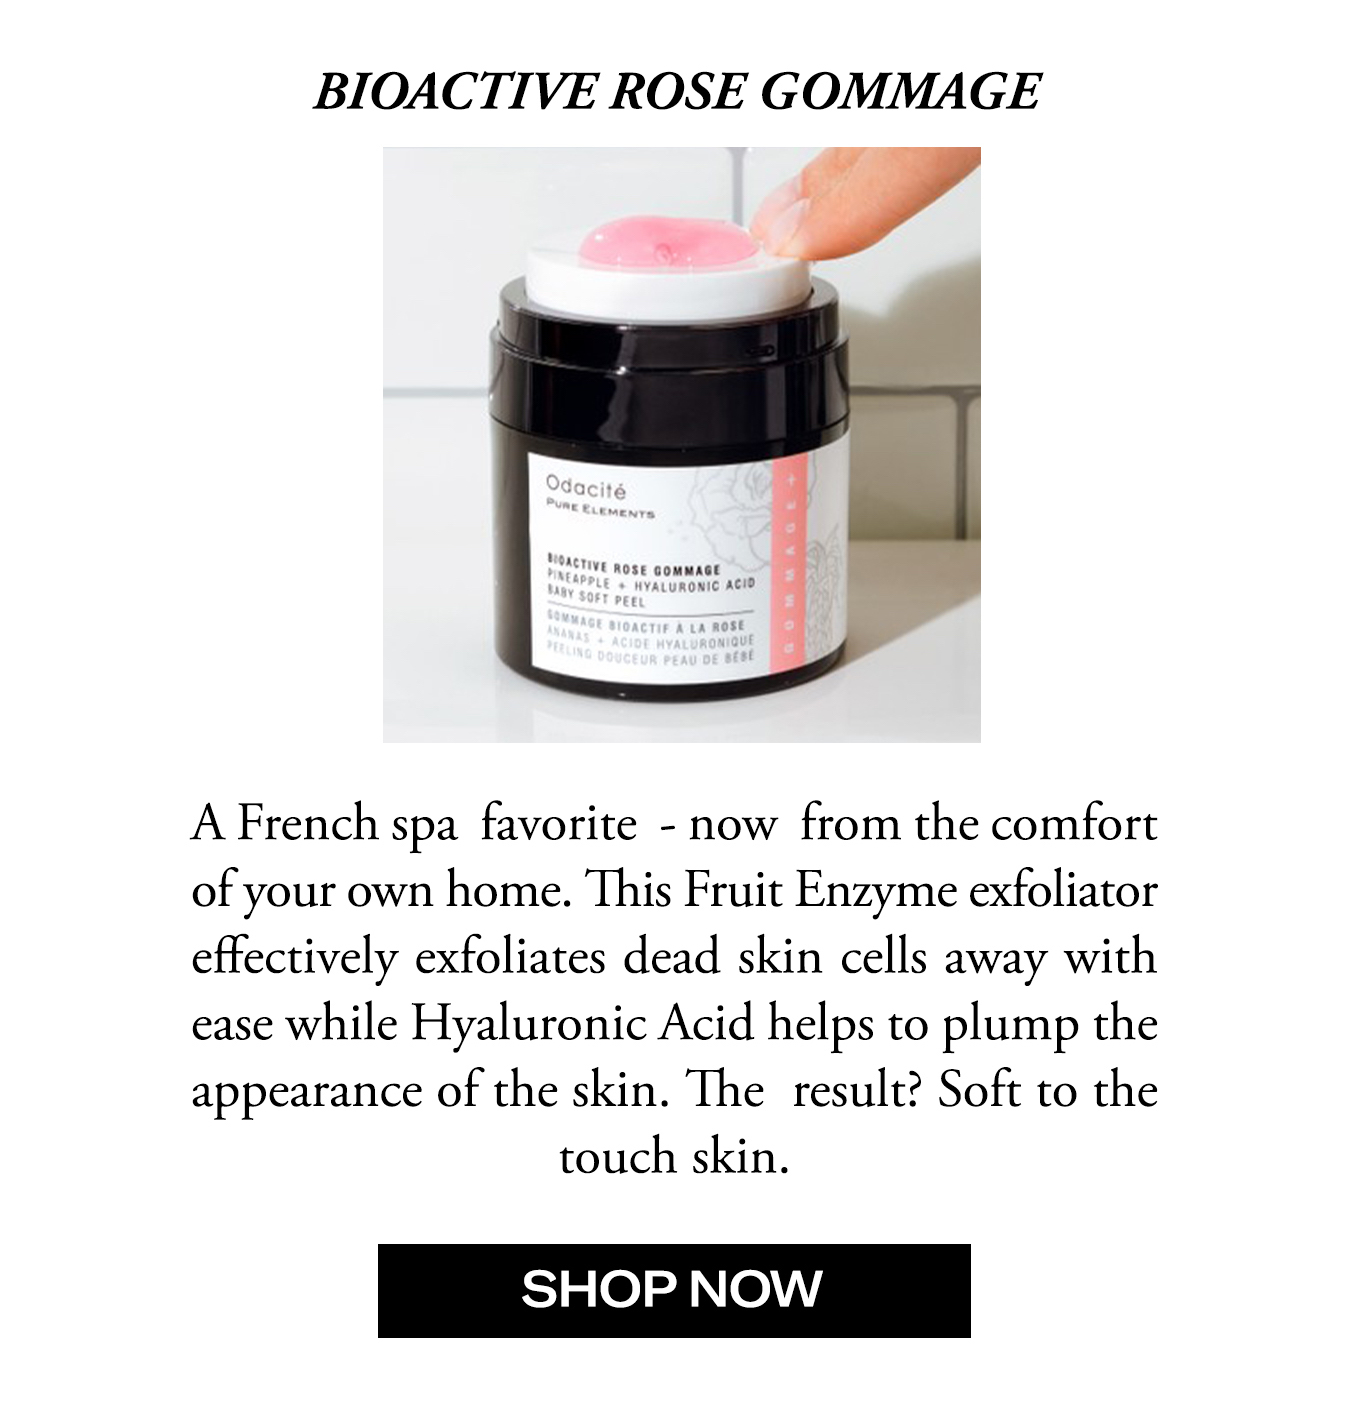 Shop Our Bioactive Rose Gommage